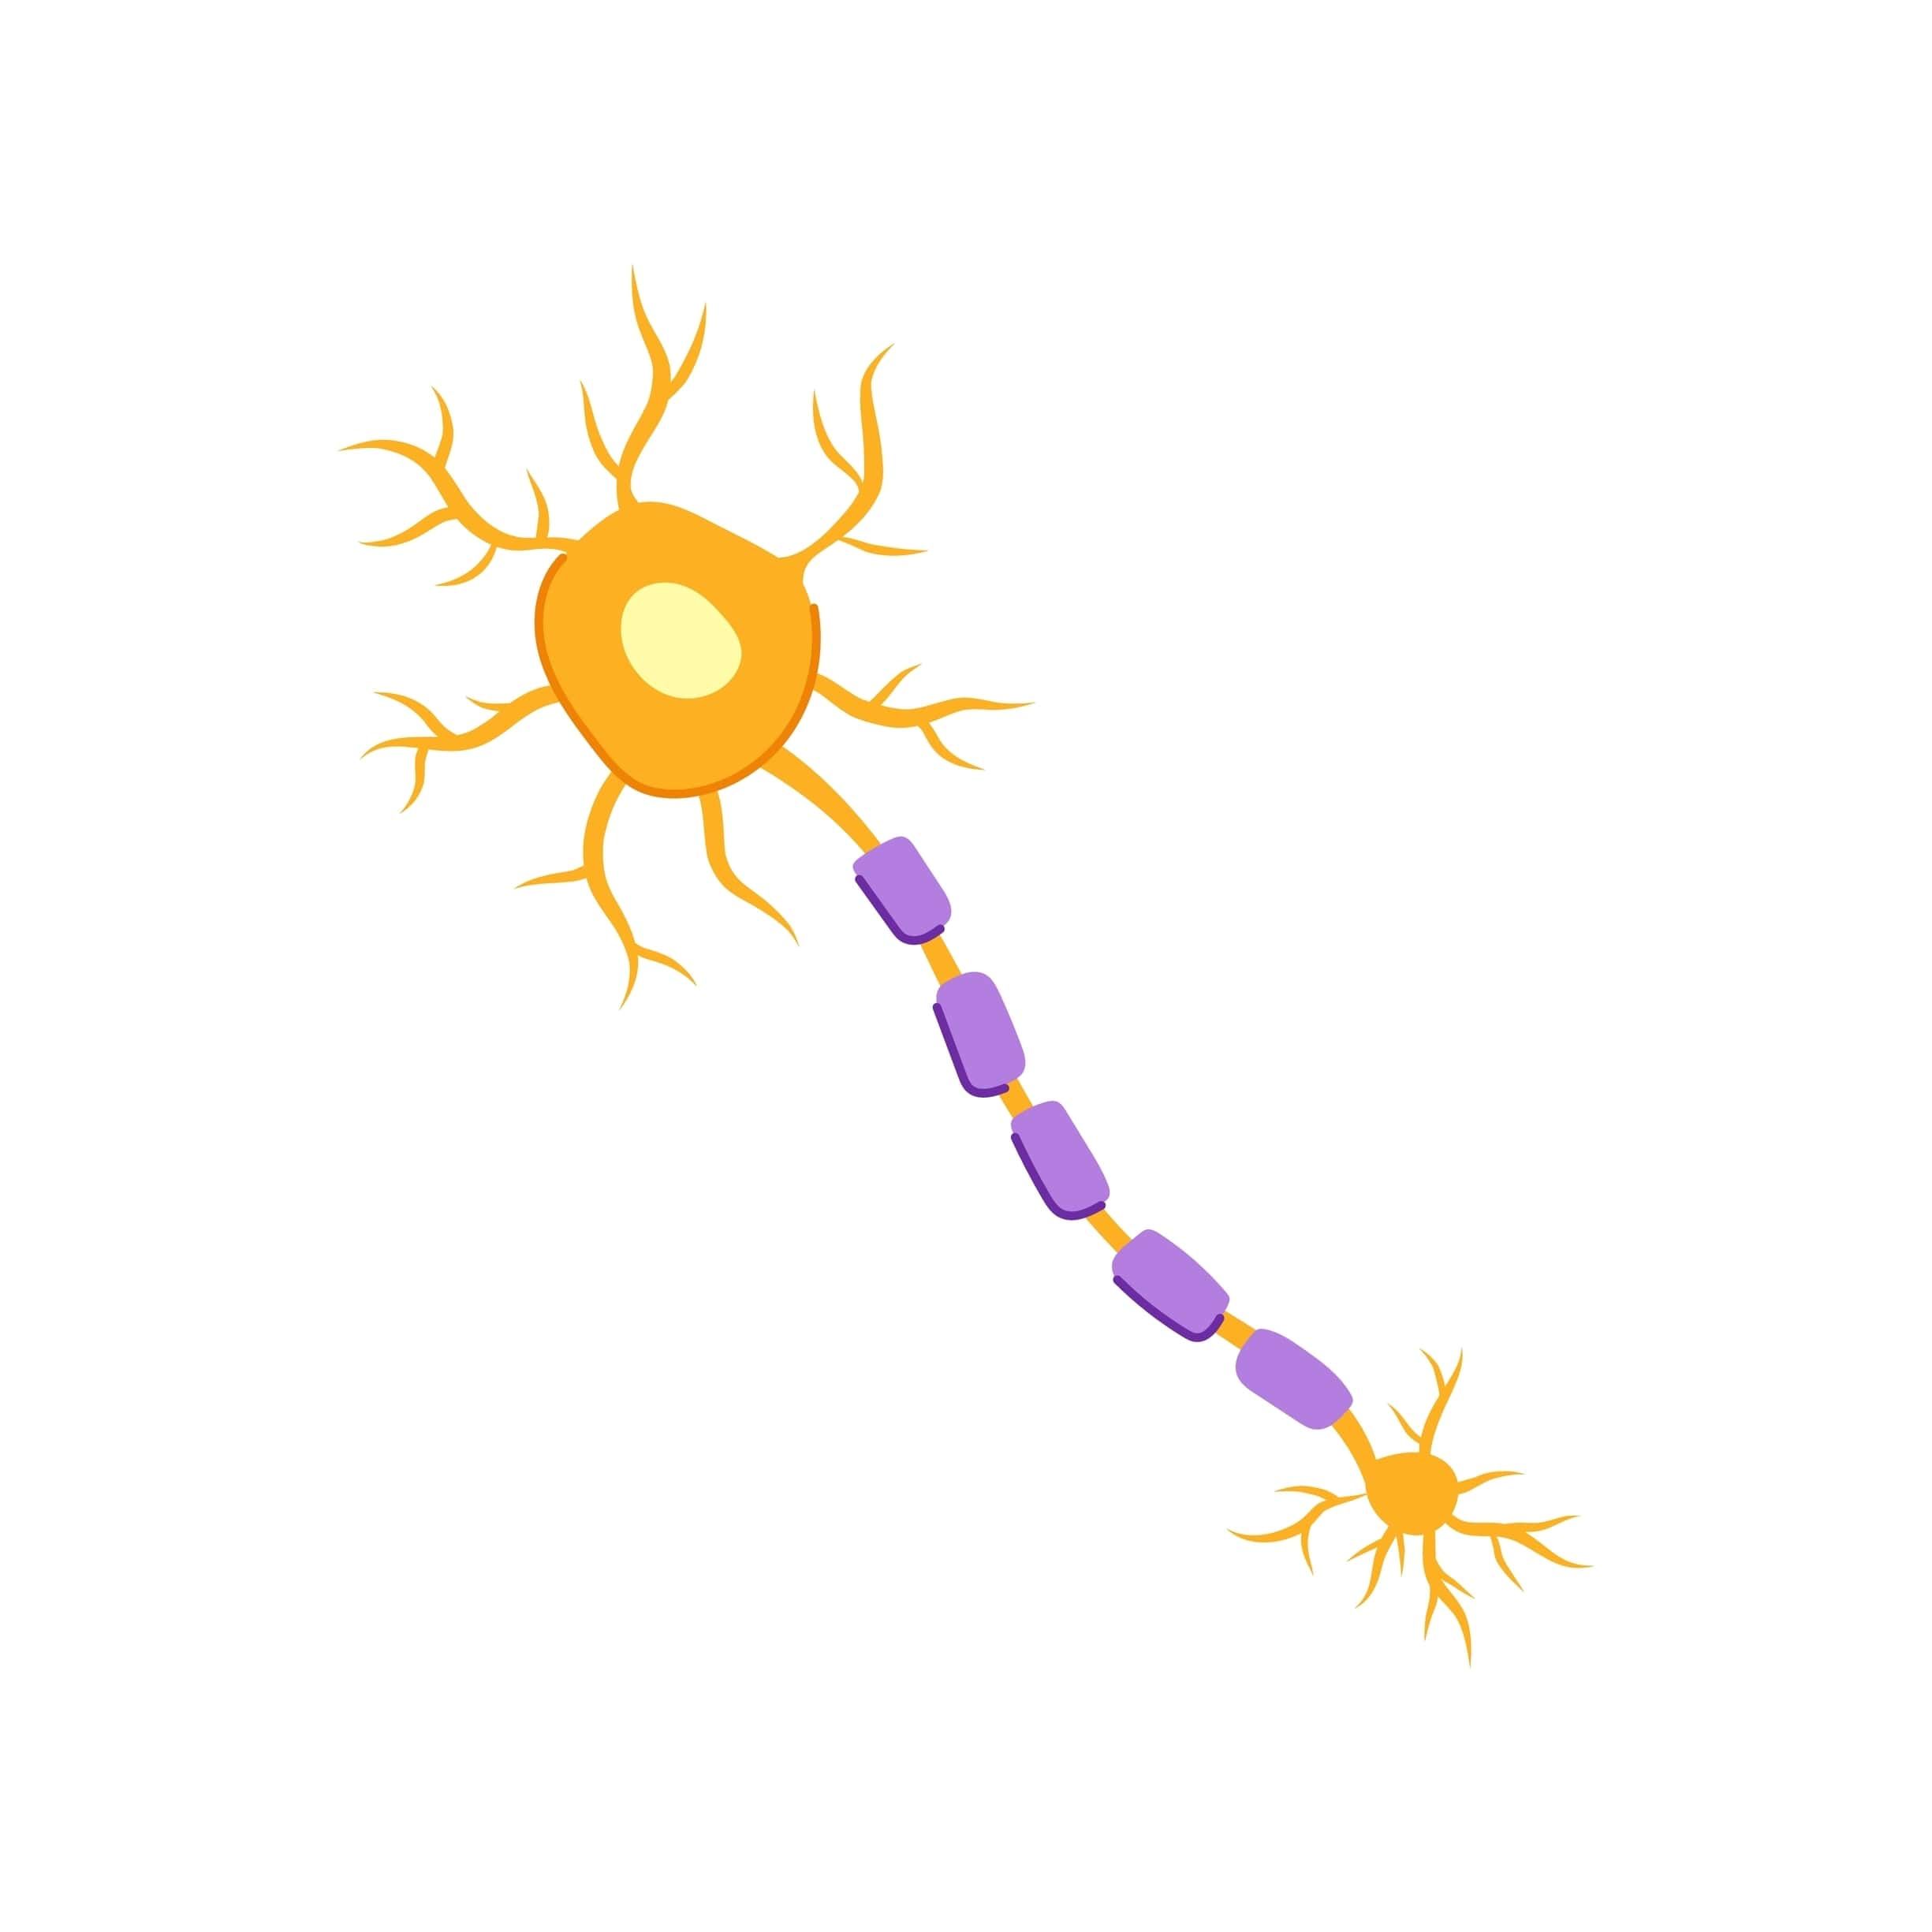 cell neurons cartoon. ai synapse, neural structure, neuro human cell neurons sign. isolated symbol vector illustration